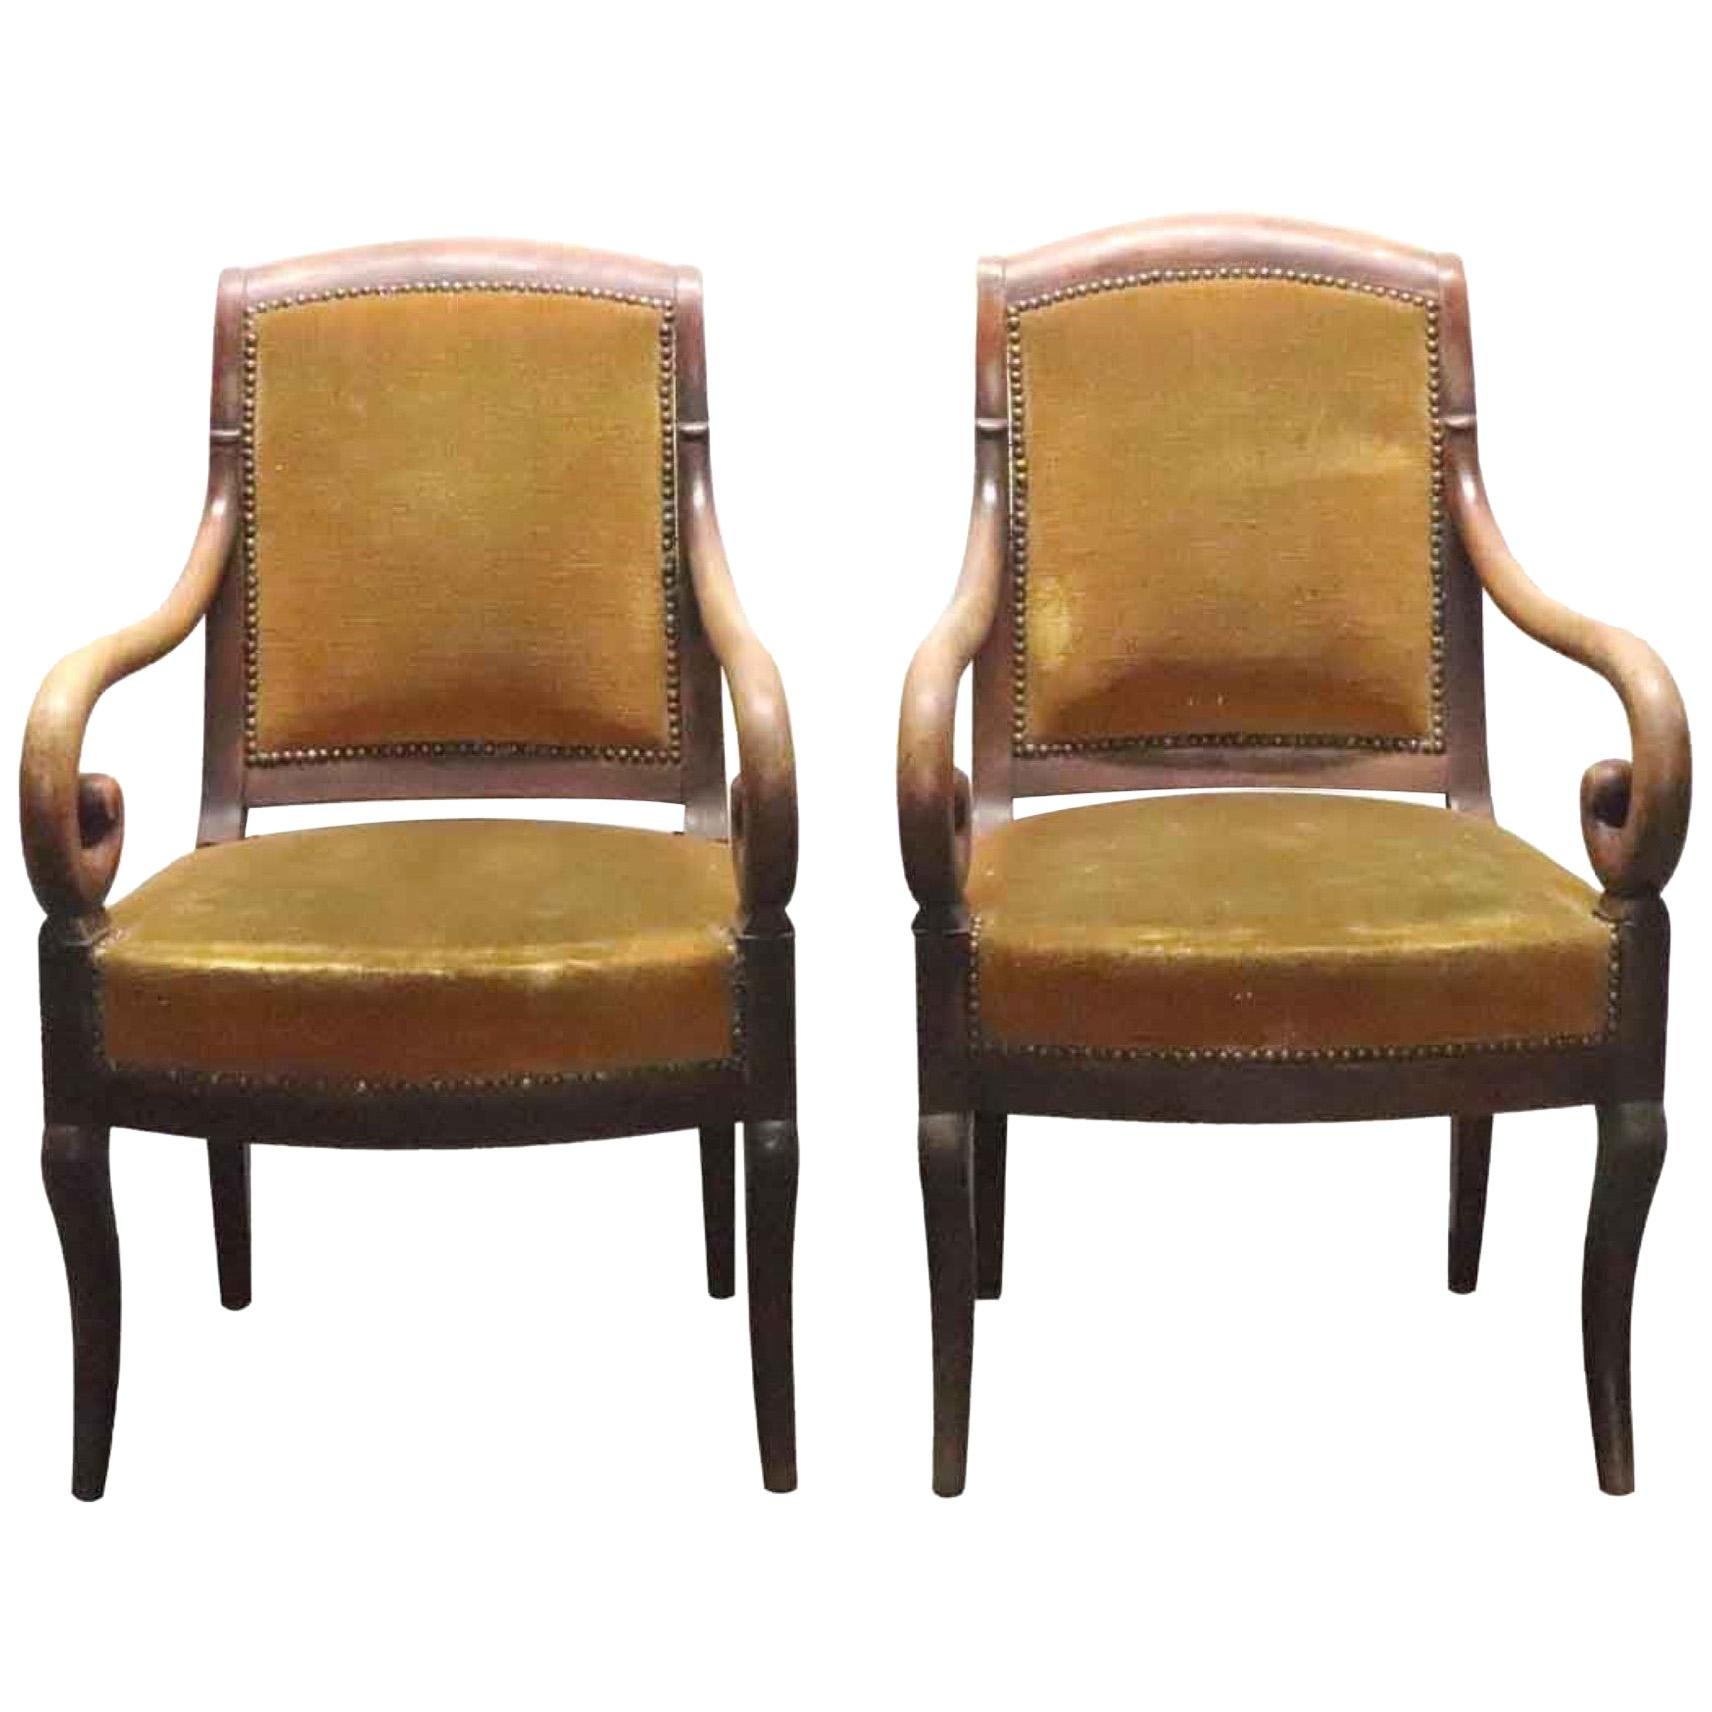 1940s Pair of French Empire Armchairs with Carved Wood Scrolling Arms